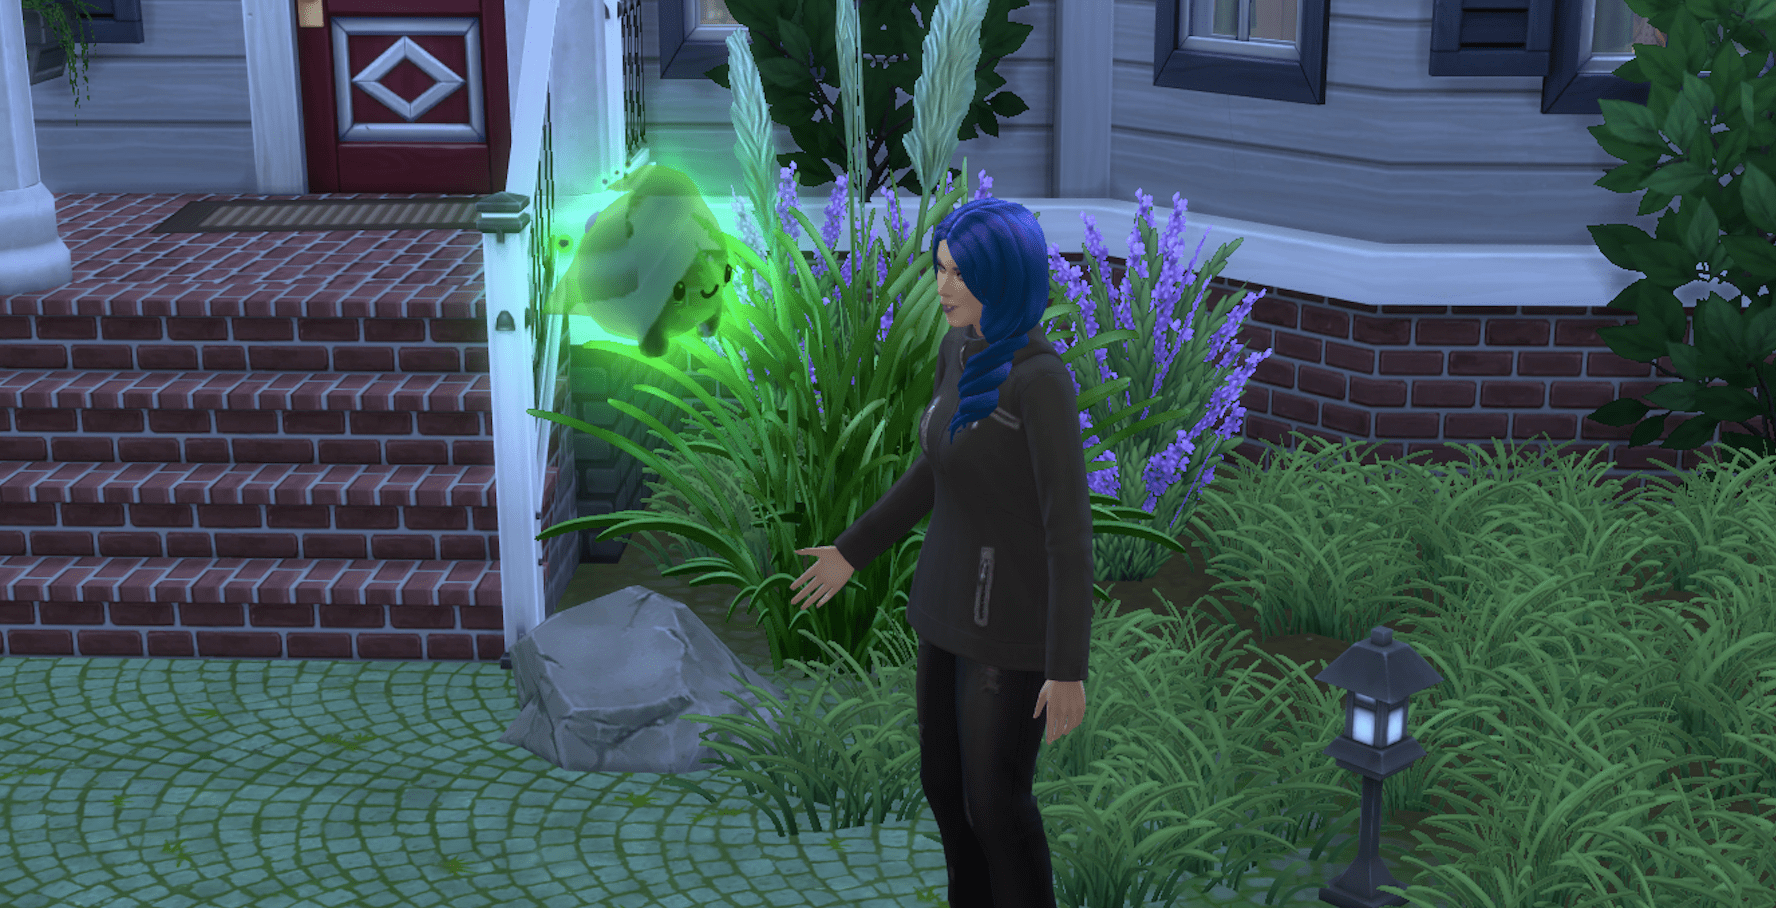 The Sims 4 Paranormal Stuff Pack: Release Date, Ghost Pack, Price